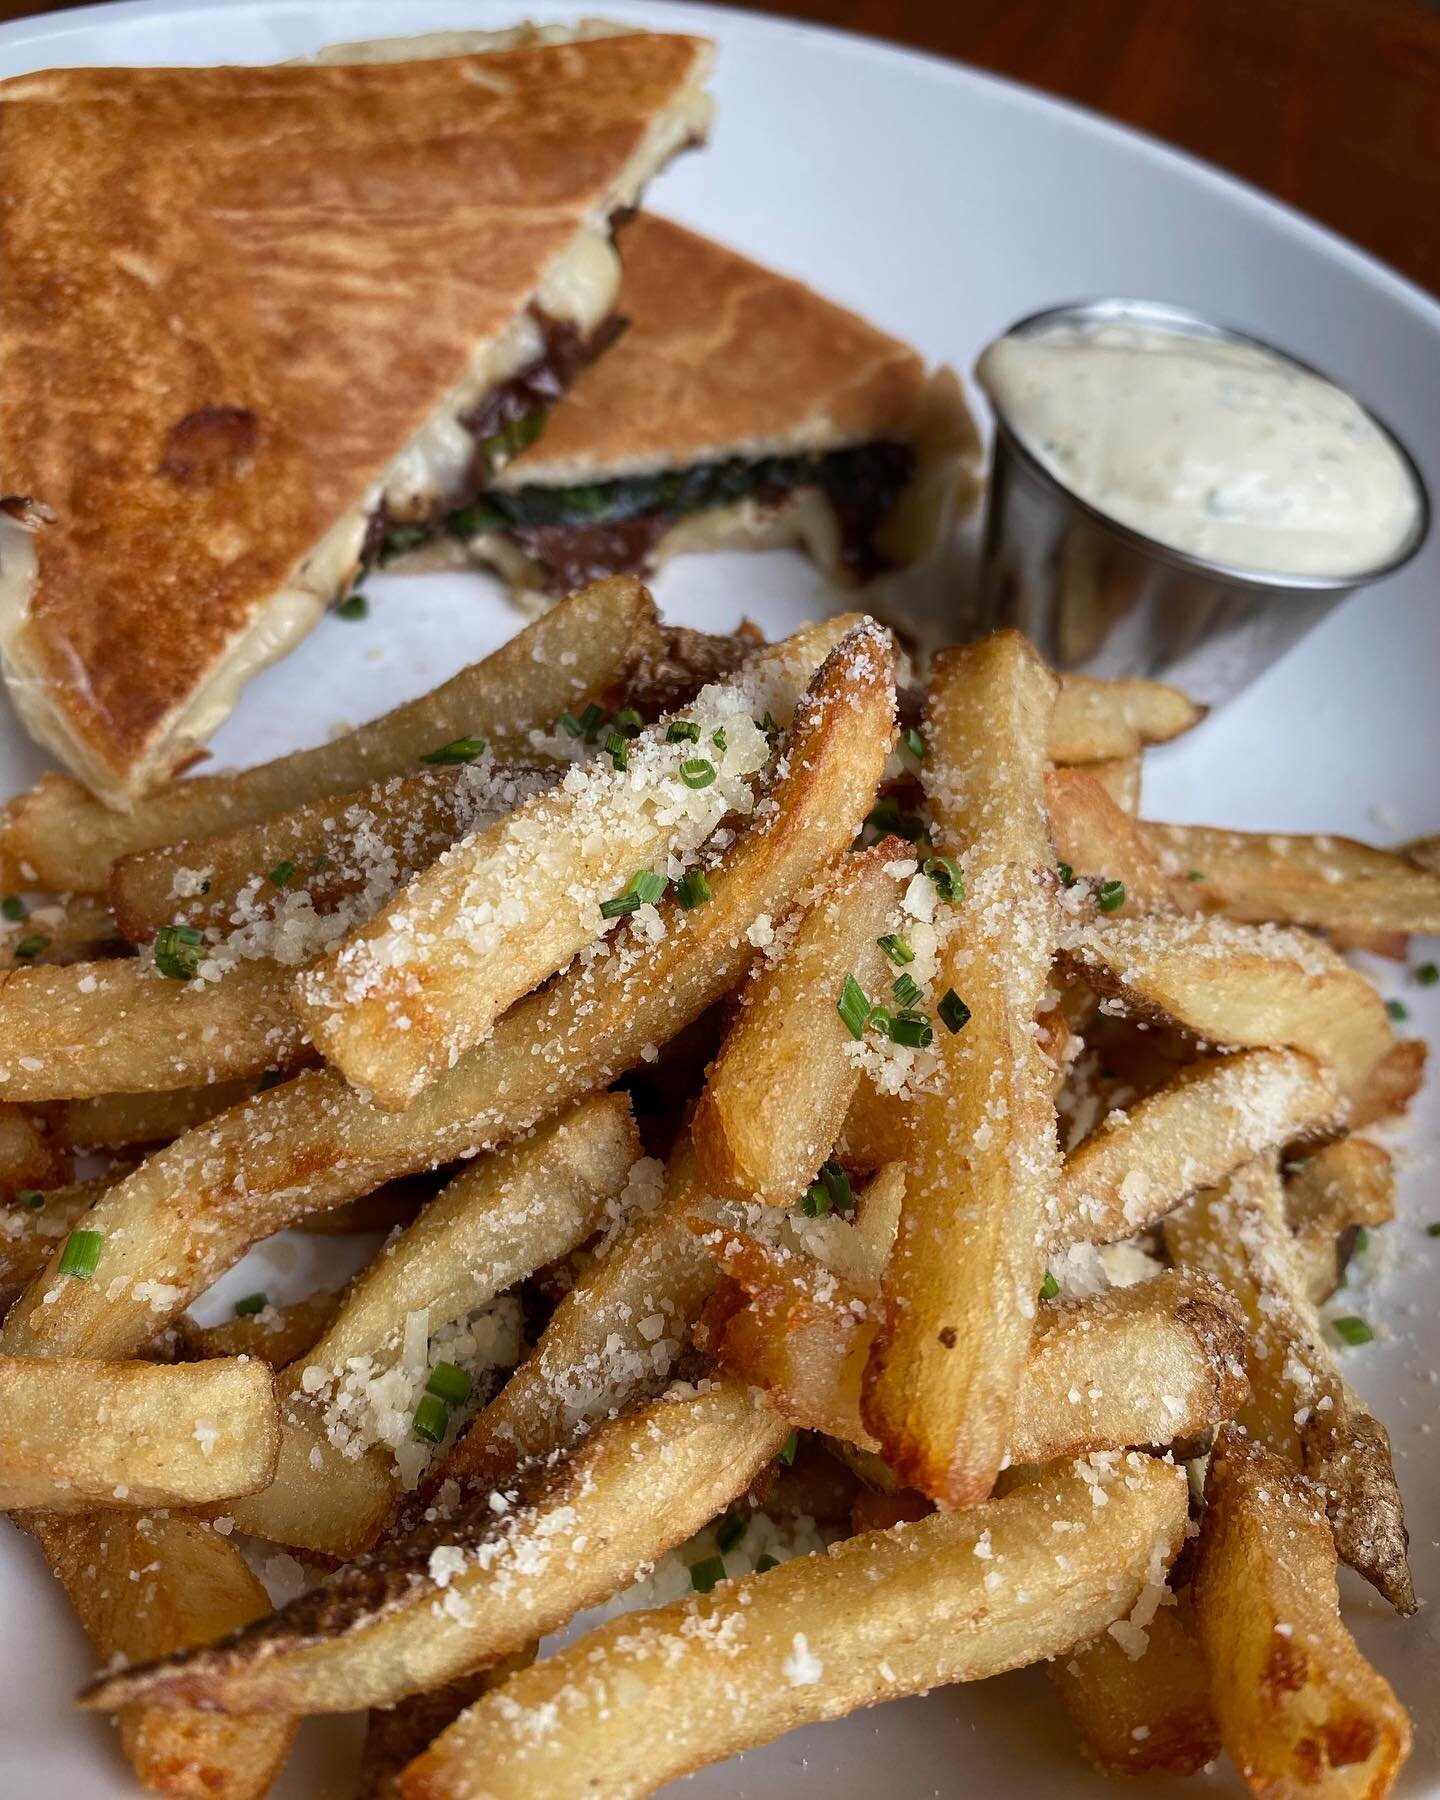 New features for tonight!!!

&bull;Chocolate &amp; Brie panini with parmesan truffle fries!

&bull;Penne pomodoro! 

&bull;
&bull;
&bull;
&bull;
&bull;
&bull;
#dueamici #downtowncolumbus #fridaynight #dinnerplans #italian #food #weekend #cbusfoodscen